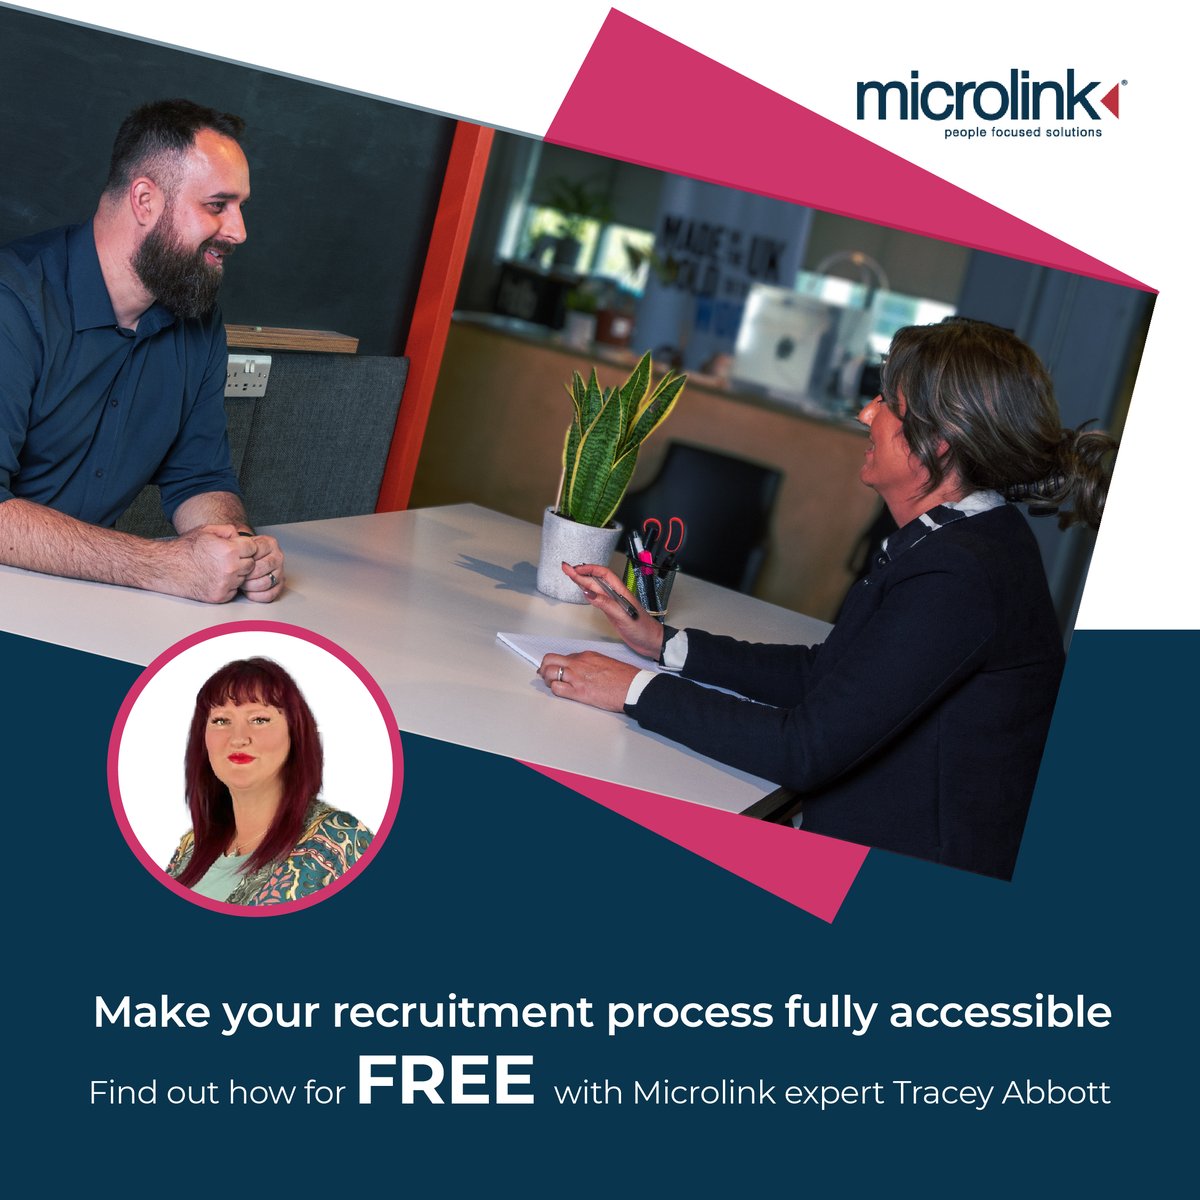 We're thrilled to present FREE consultancy sessions to address your #AccessibleRecruitment needs, guided by expert Tracey Abbott. This limited-time opportunity allows you to tap into the expertise of our experts, providing insights usually valued at £600.

shorturl.at/cdpH8